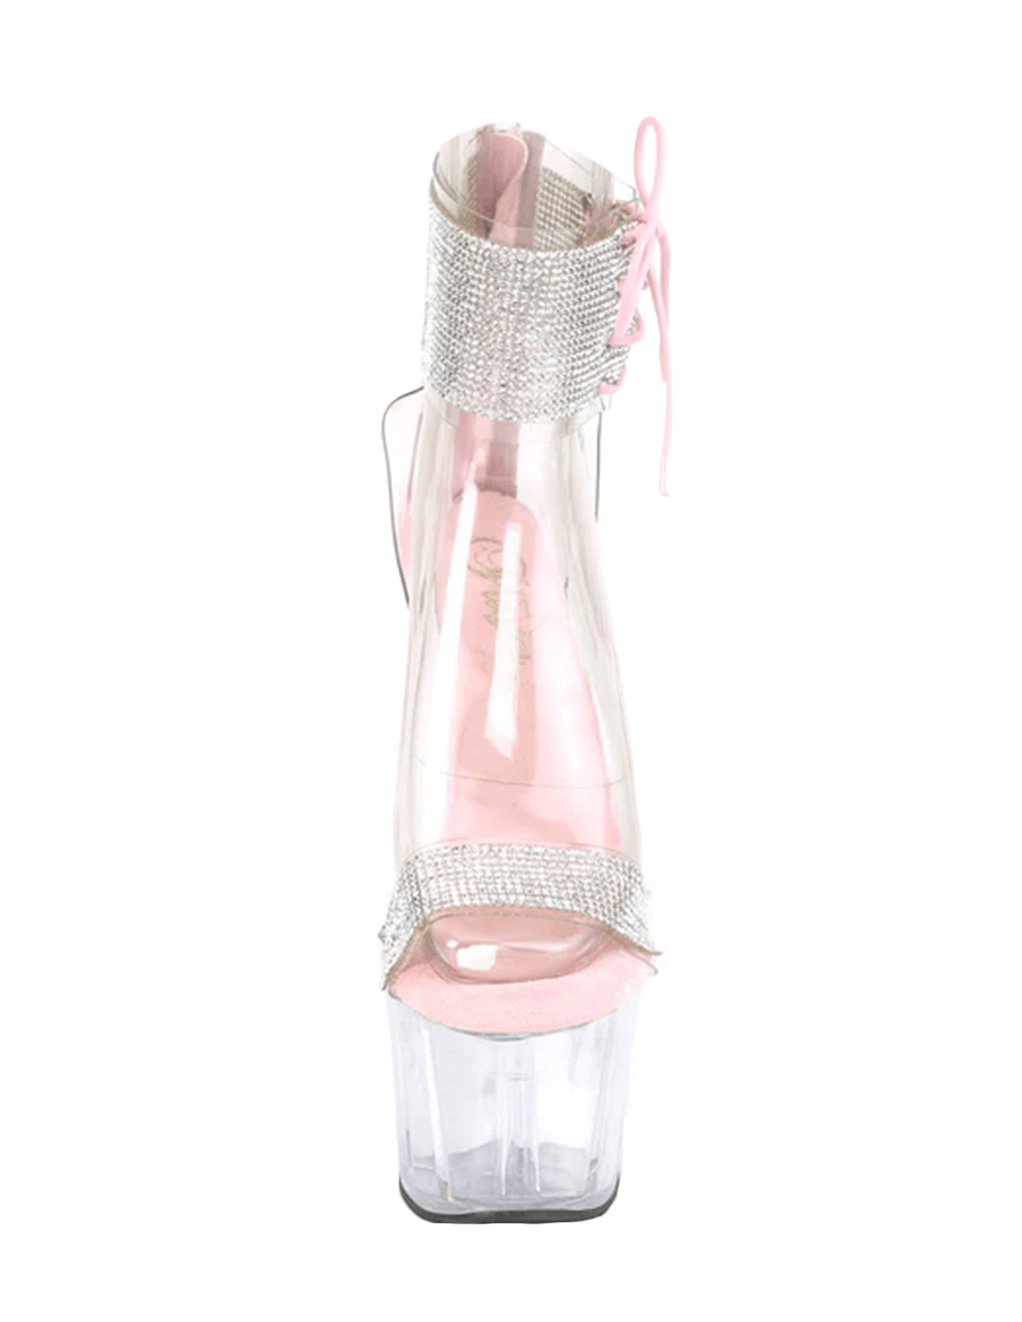 Pleaser Adore 727RS Rhinestone Ankle Cuff Platform Sandal - Clear/Pink - Front